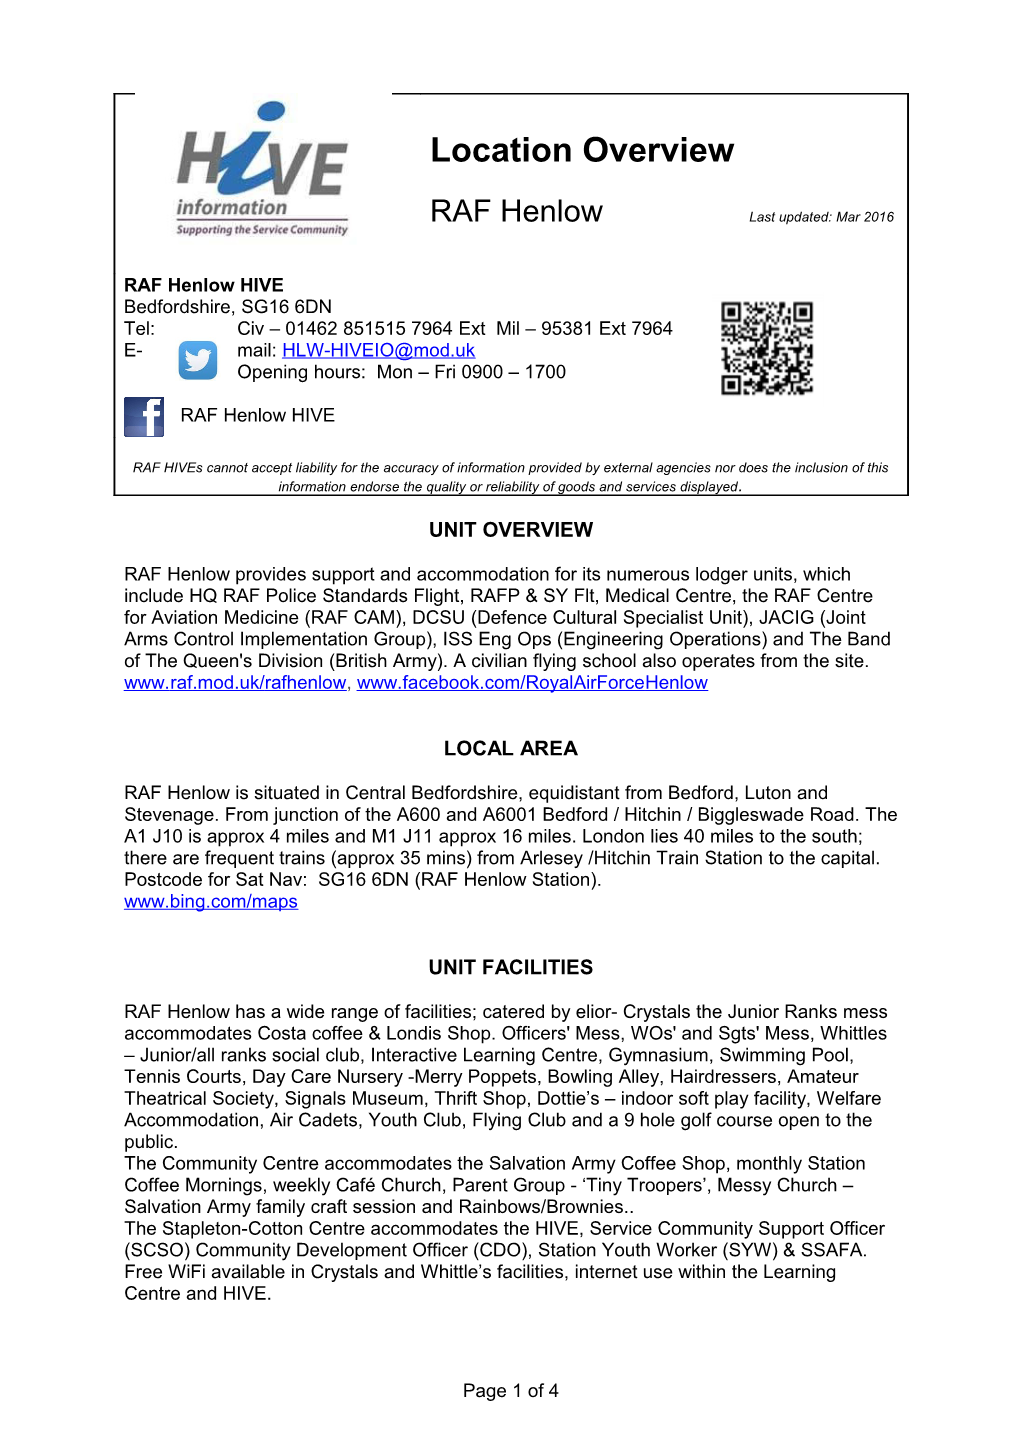 RAF HIVE Overview Information Sheet Template